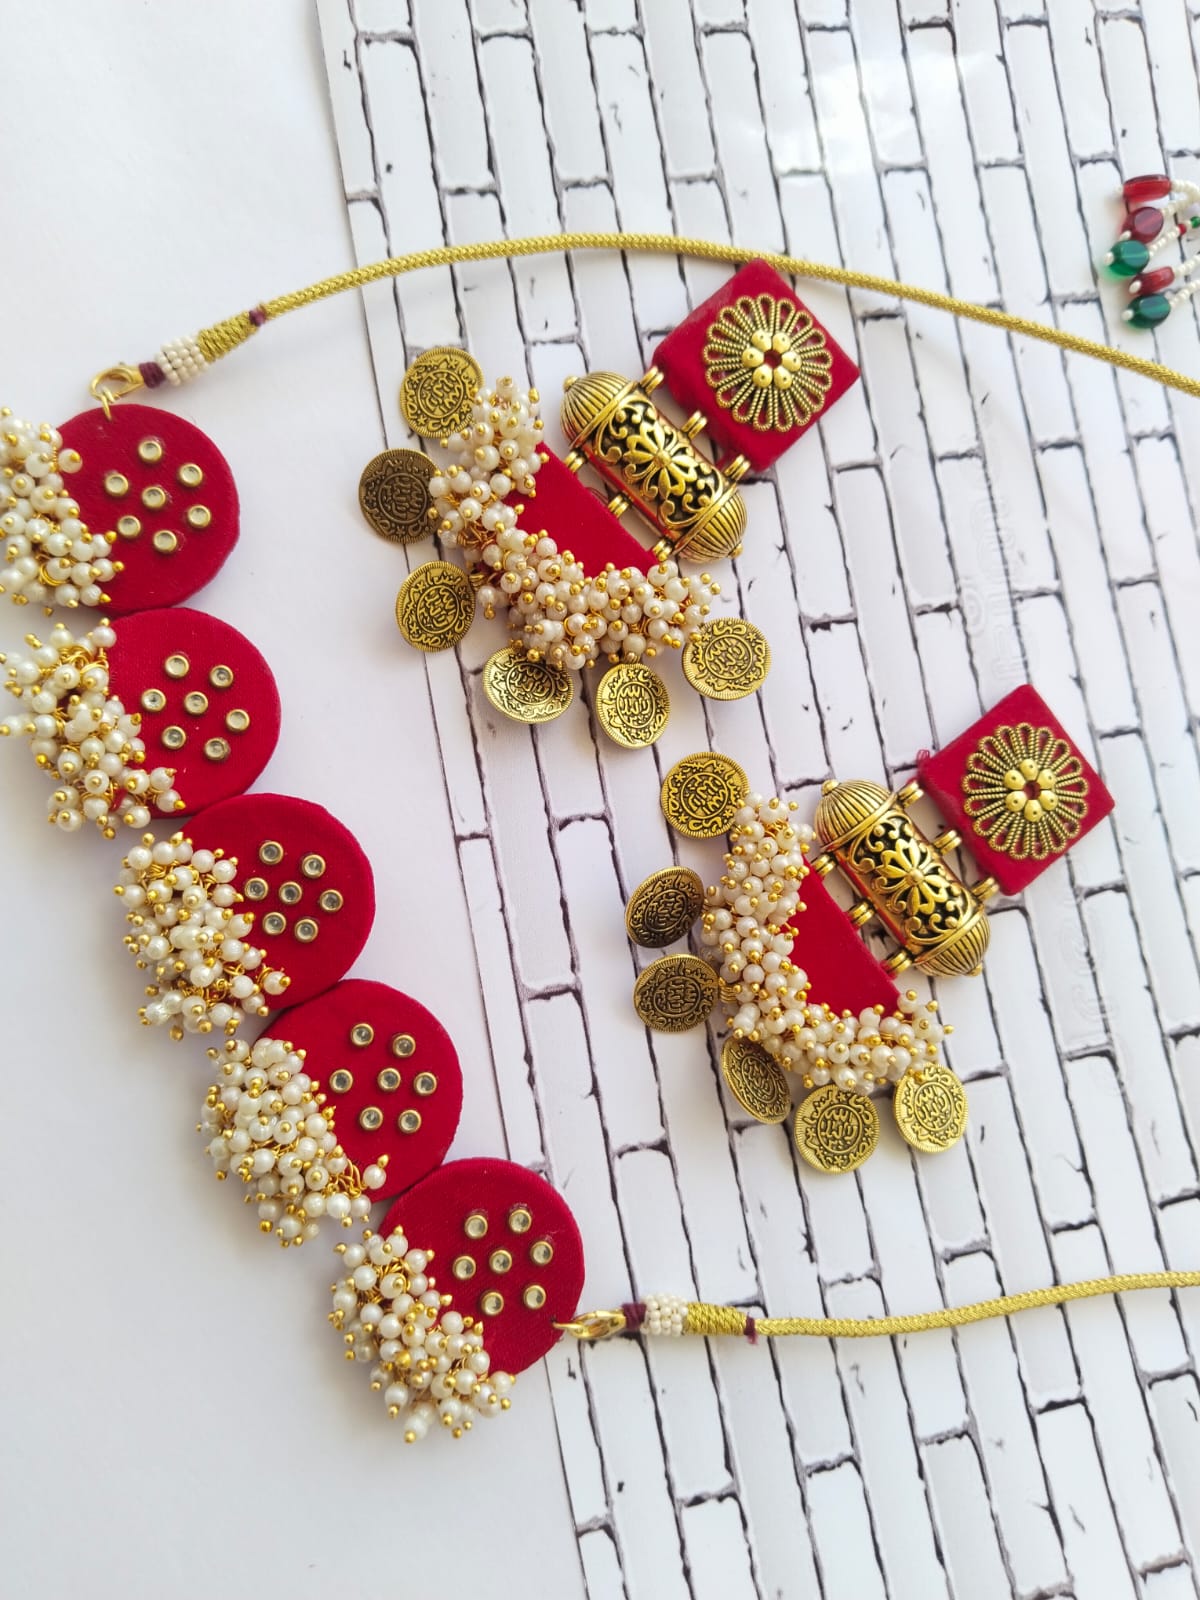 Hot red choker necklace with golden beads and coins with matching earrings on white backdrop